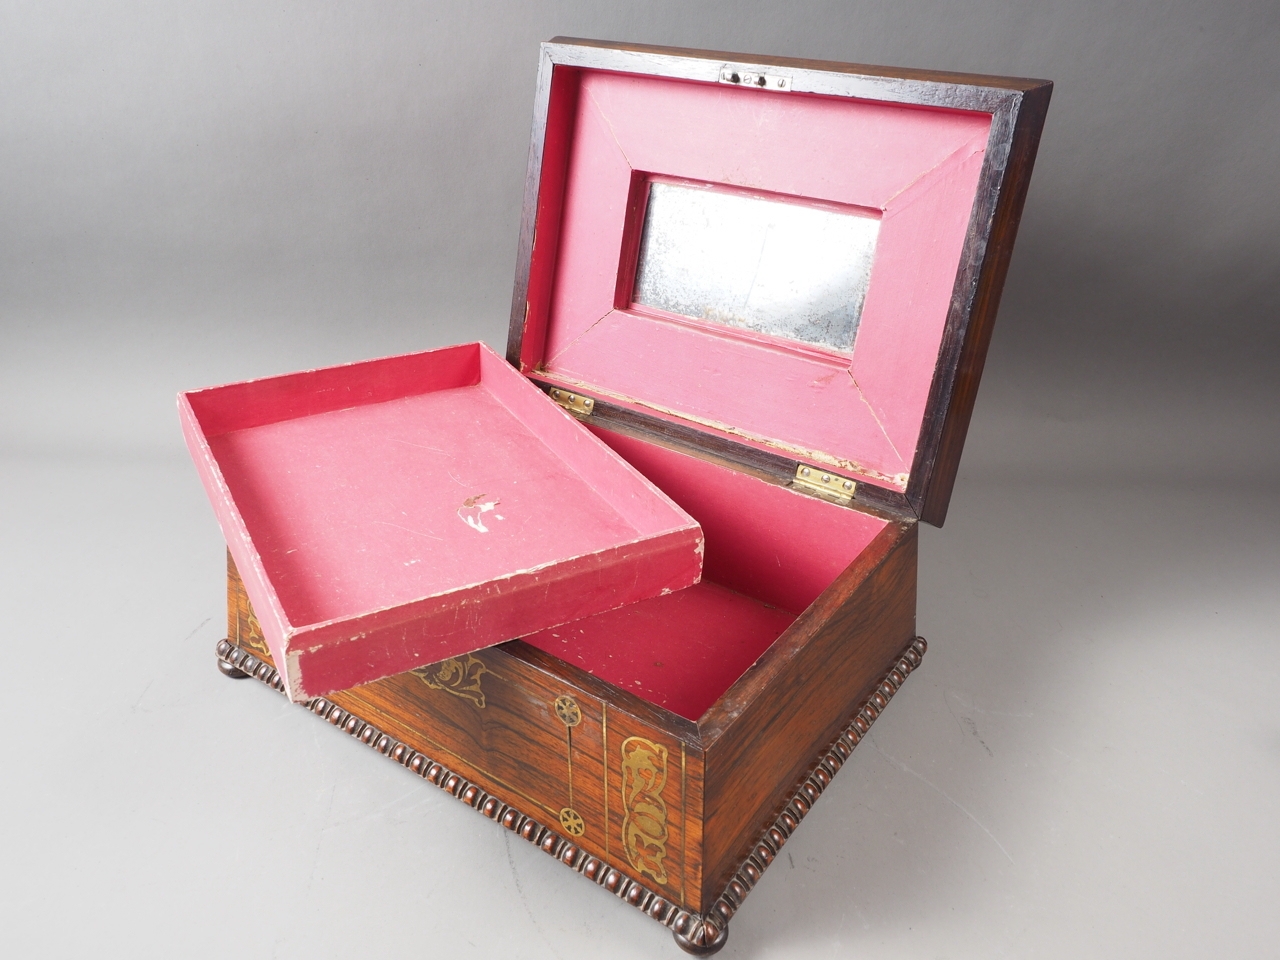 An early 19th century rosewood and brass inlaid work box with lift out tray, on bun feet, 14" wide - Image 2 of 2